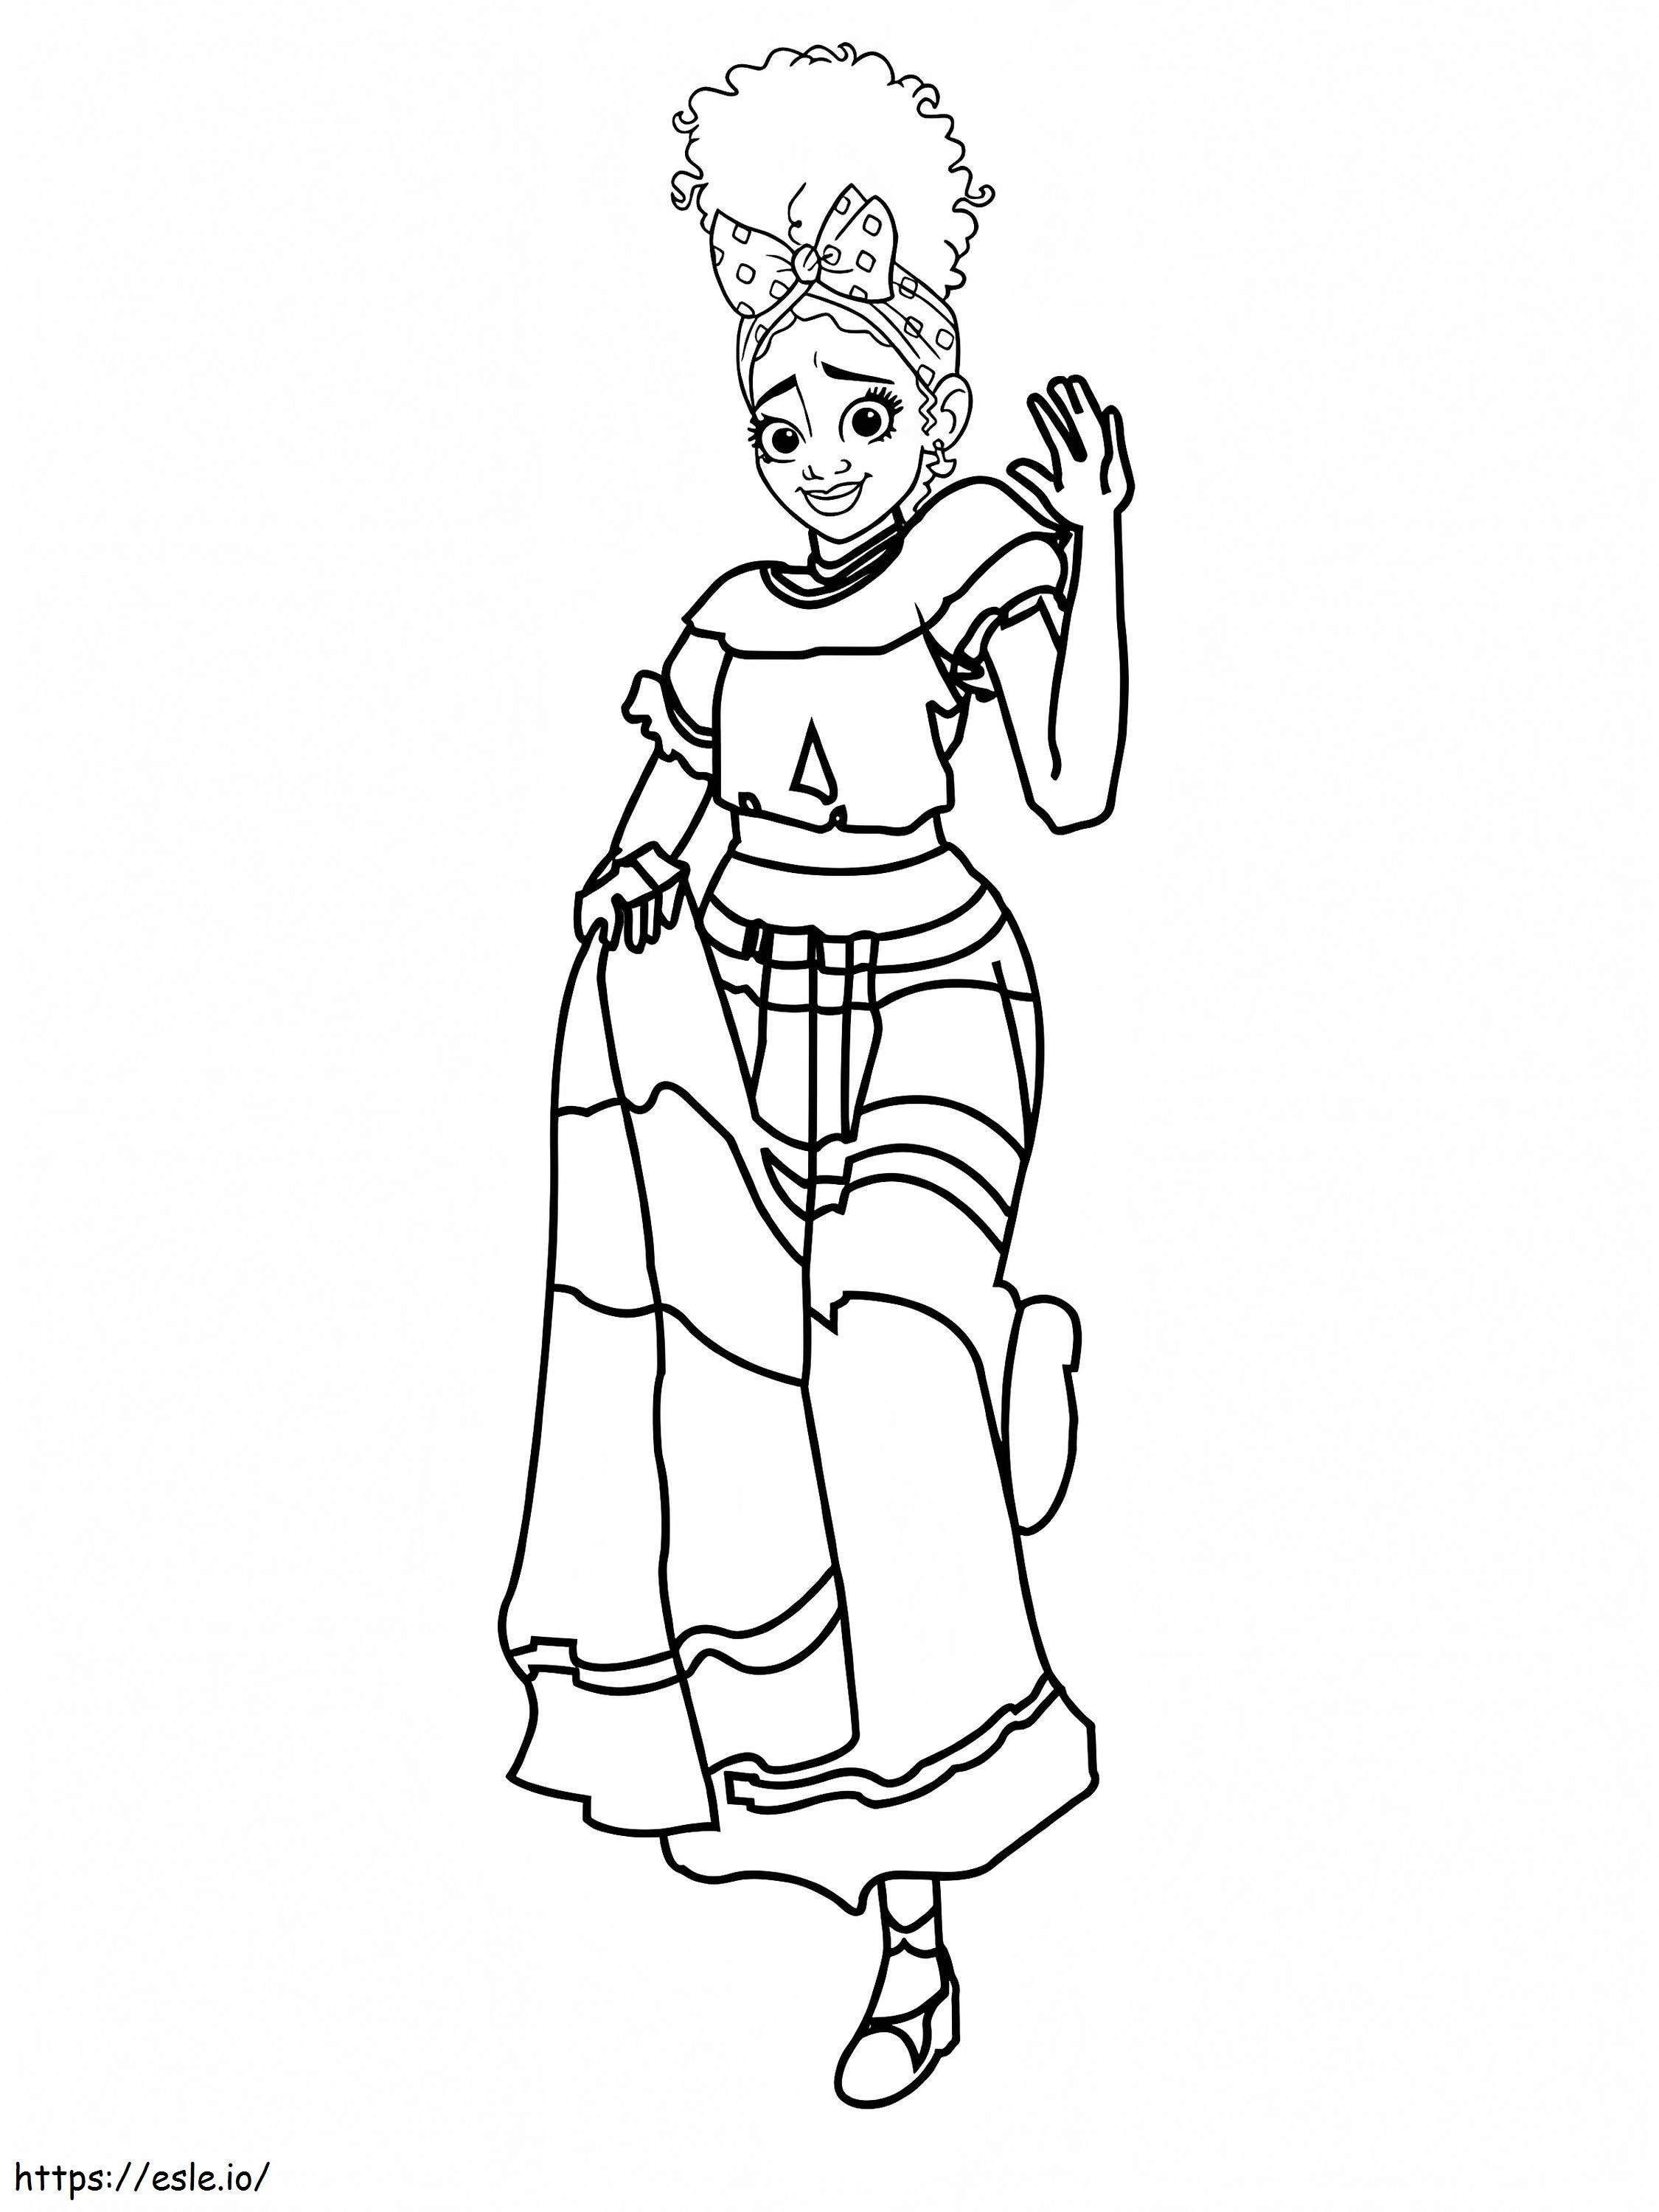 Dolores With Elegant Dress coloring page